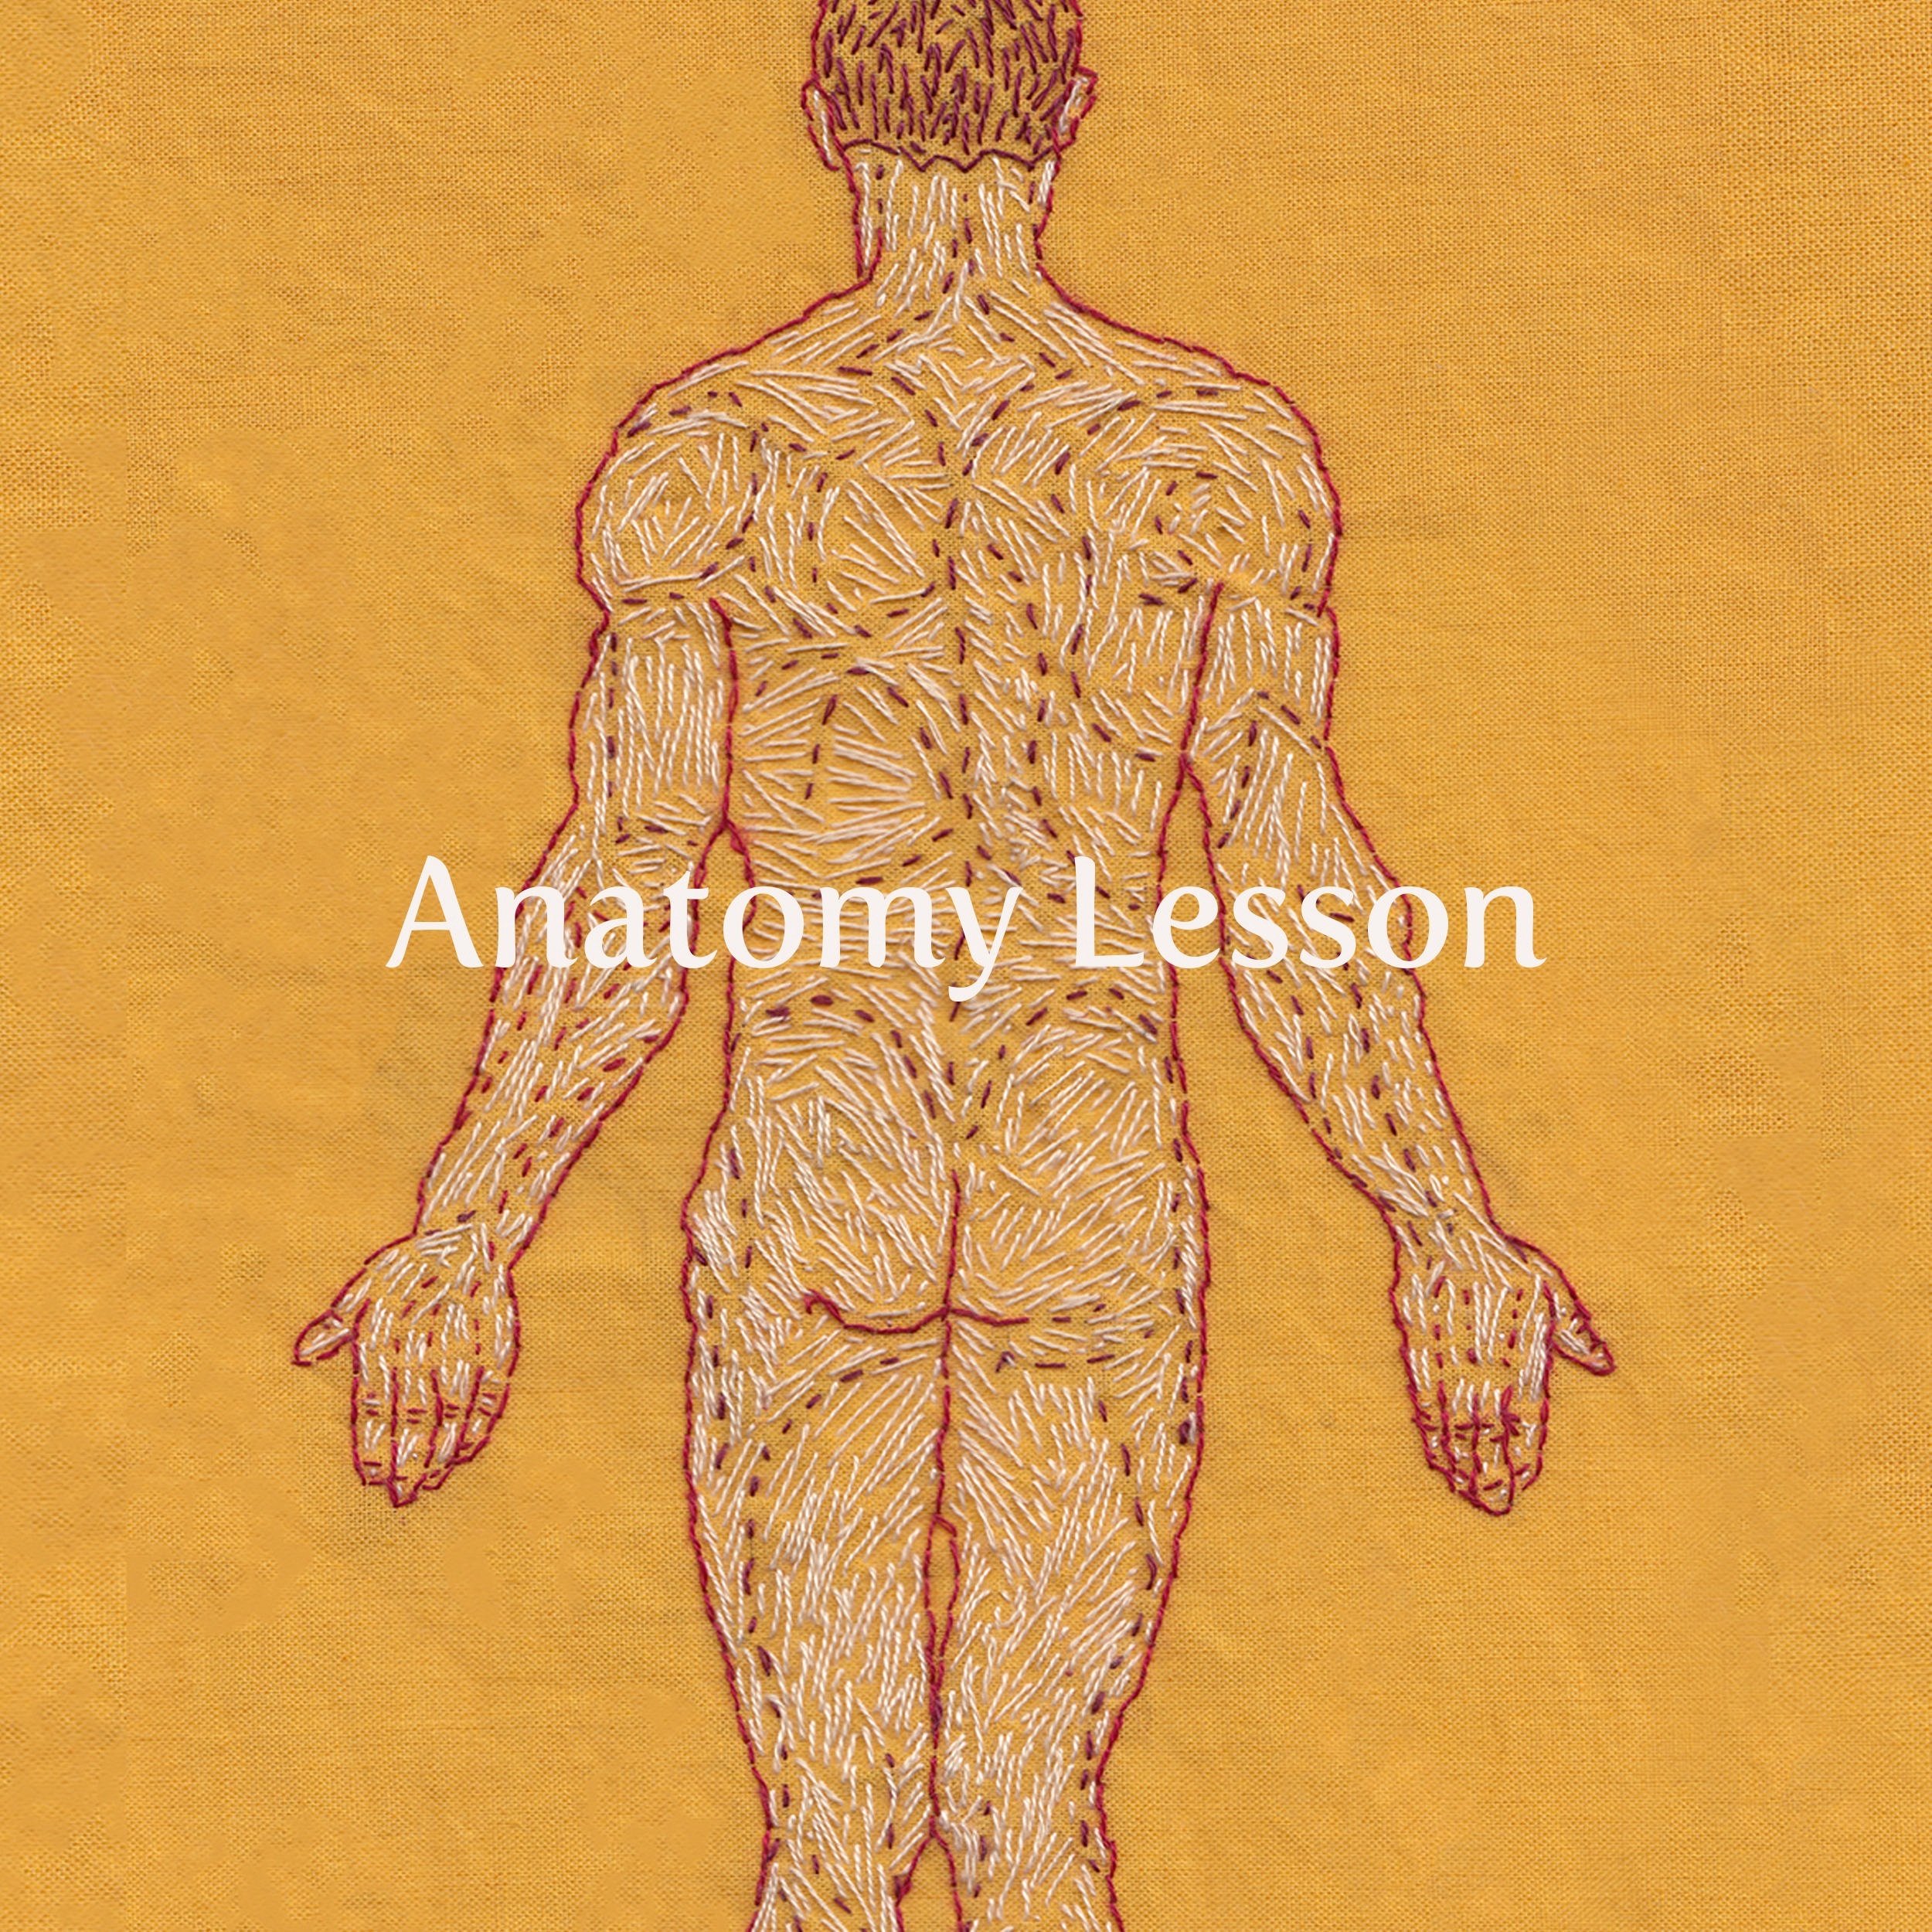 ANATOMY LESSON for Homepage rev'd  COMPRESSED2.jpg